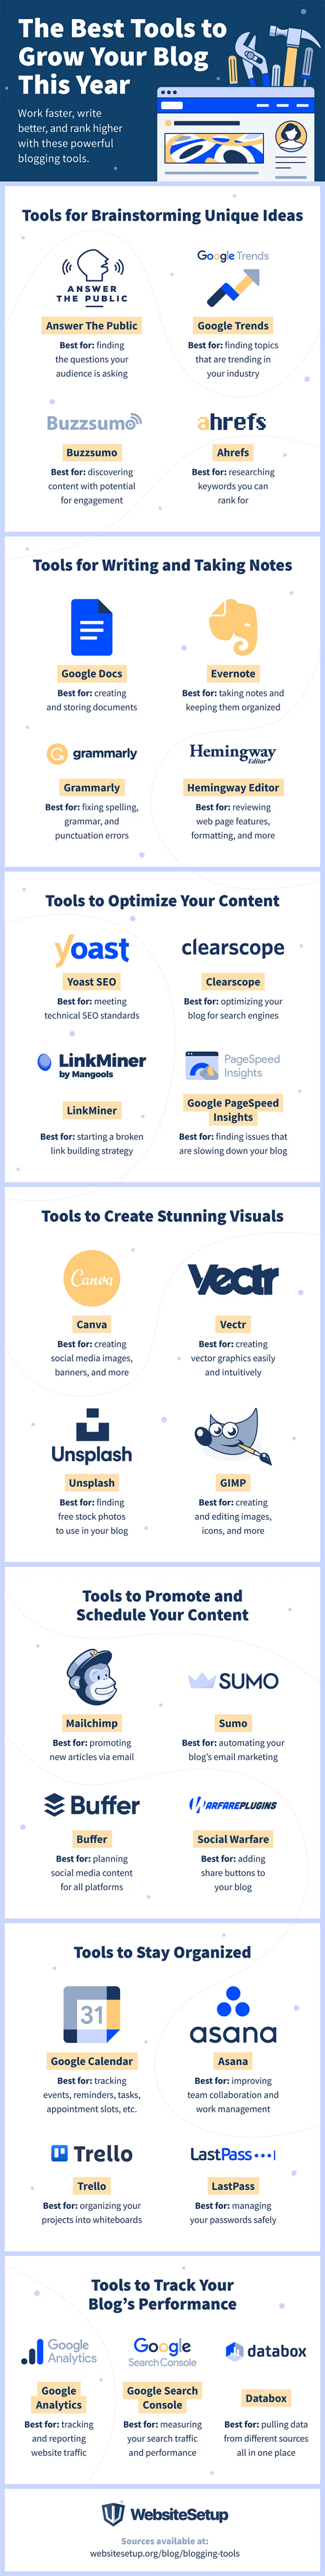 27 time saving blogging tools for a supreme content marketing strategy in 2022 infographic